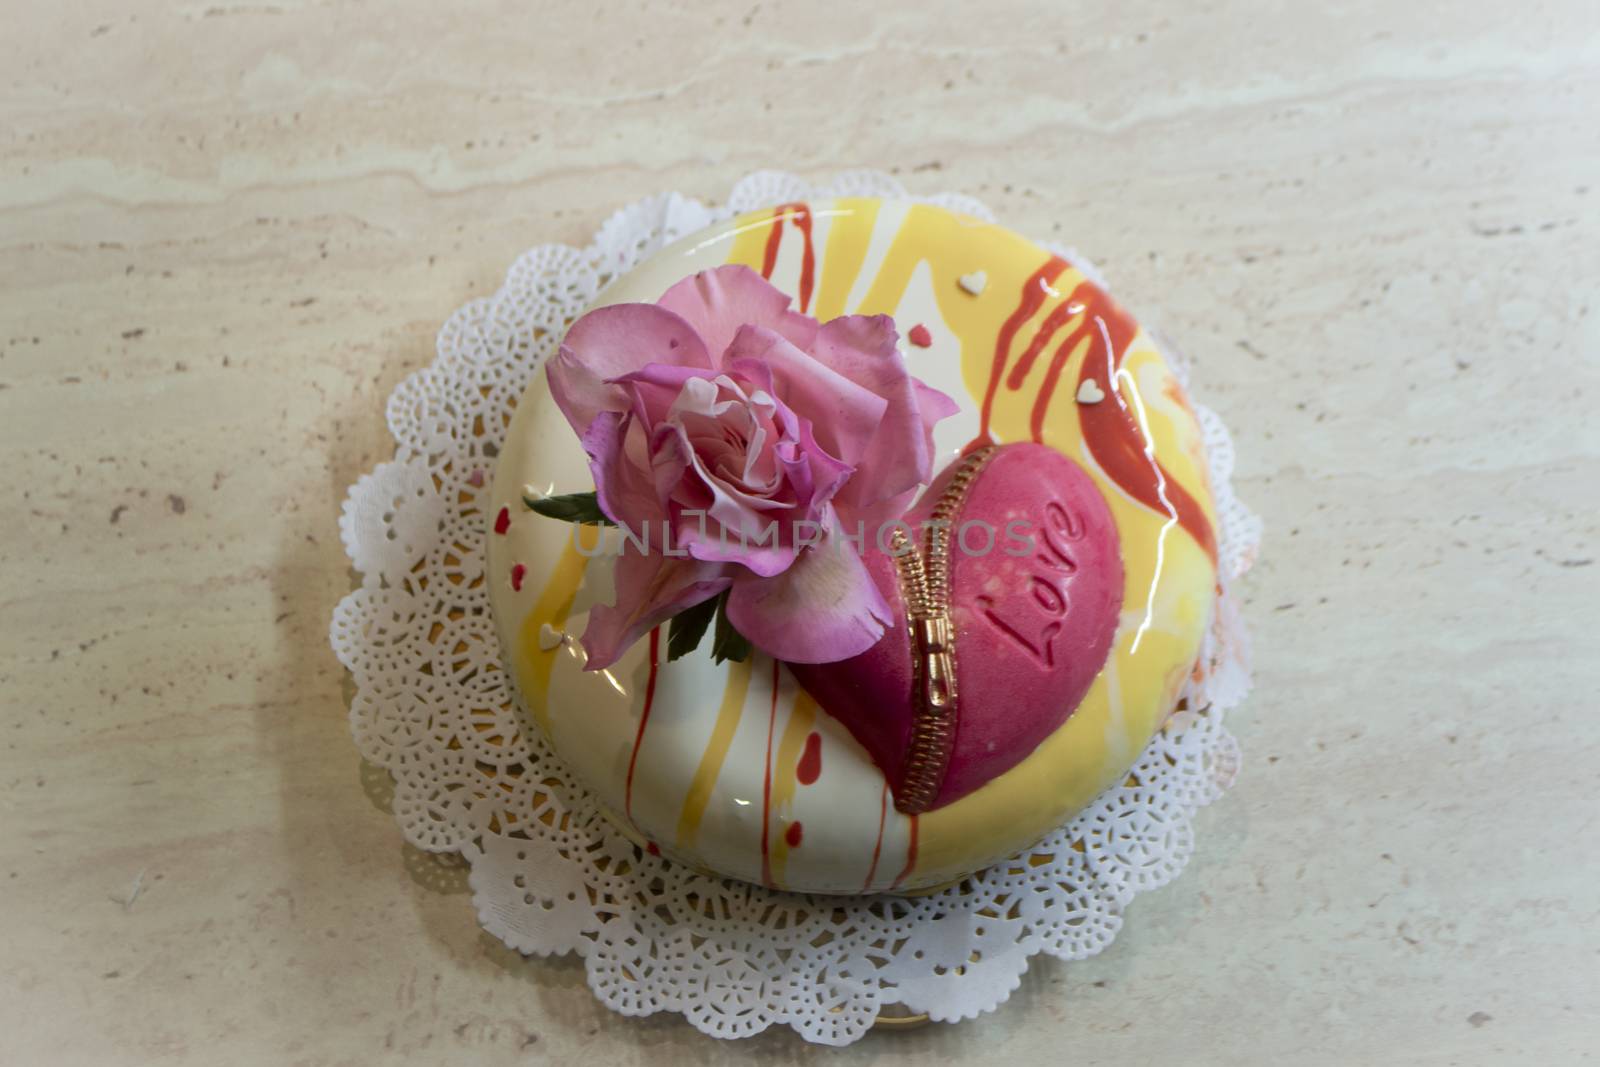 mousse cake with heart of chocolate decorated with edible rose. Fondant flowerSt. Valentine's Day